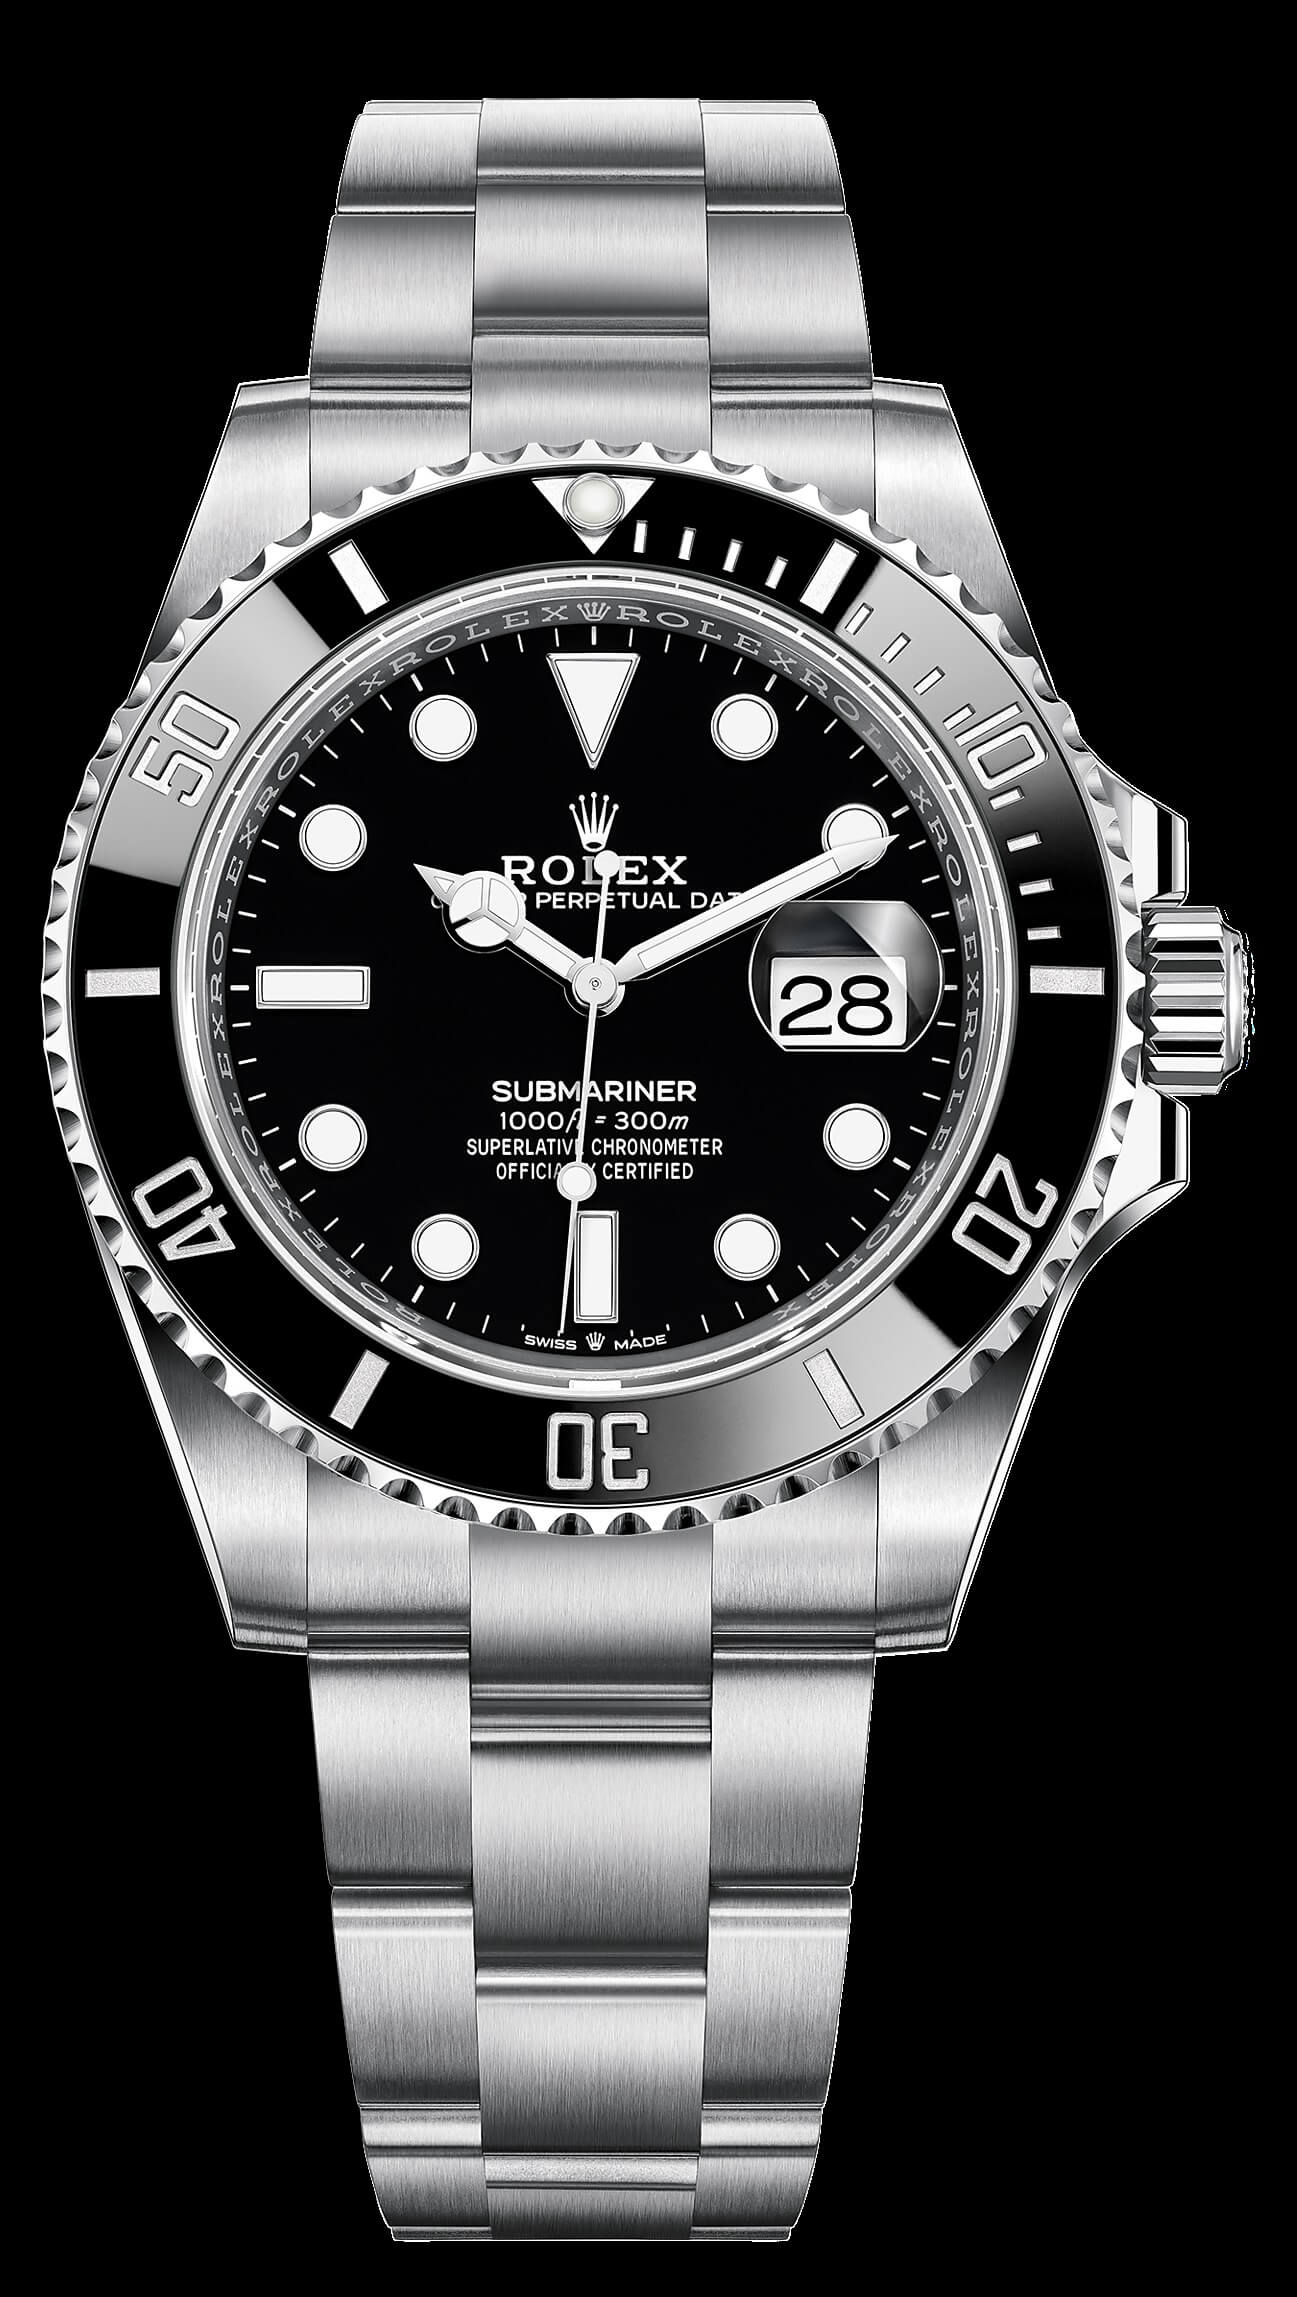 Rolex Debuts 2020 Steel 126610 And Two-Tone 126613 Submariner Watch Models